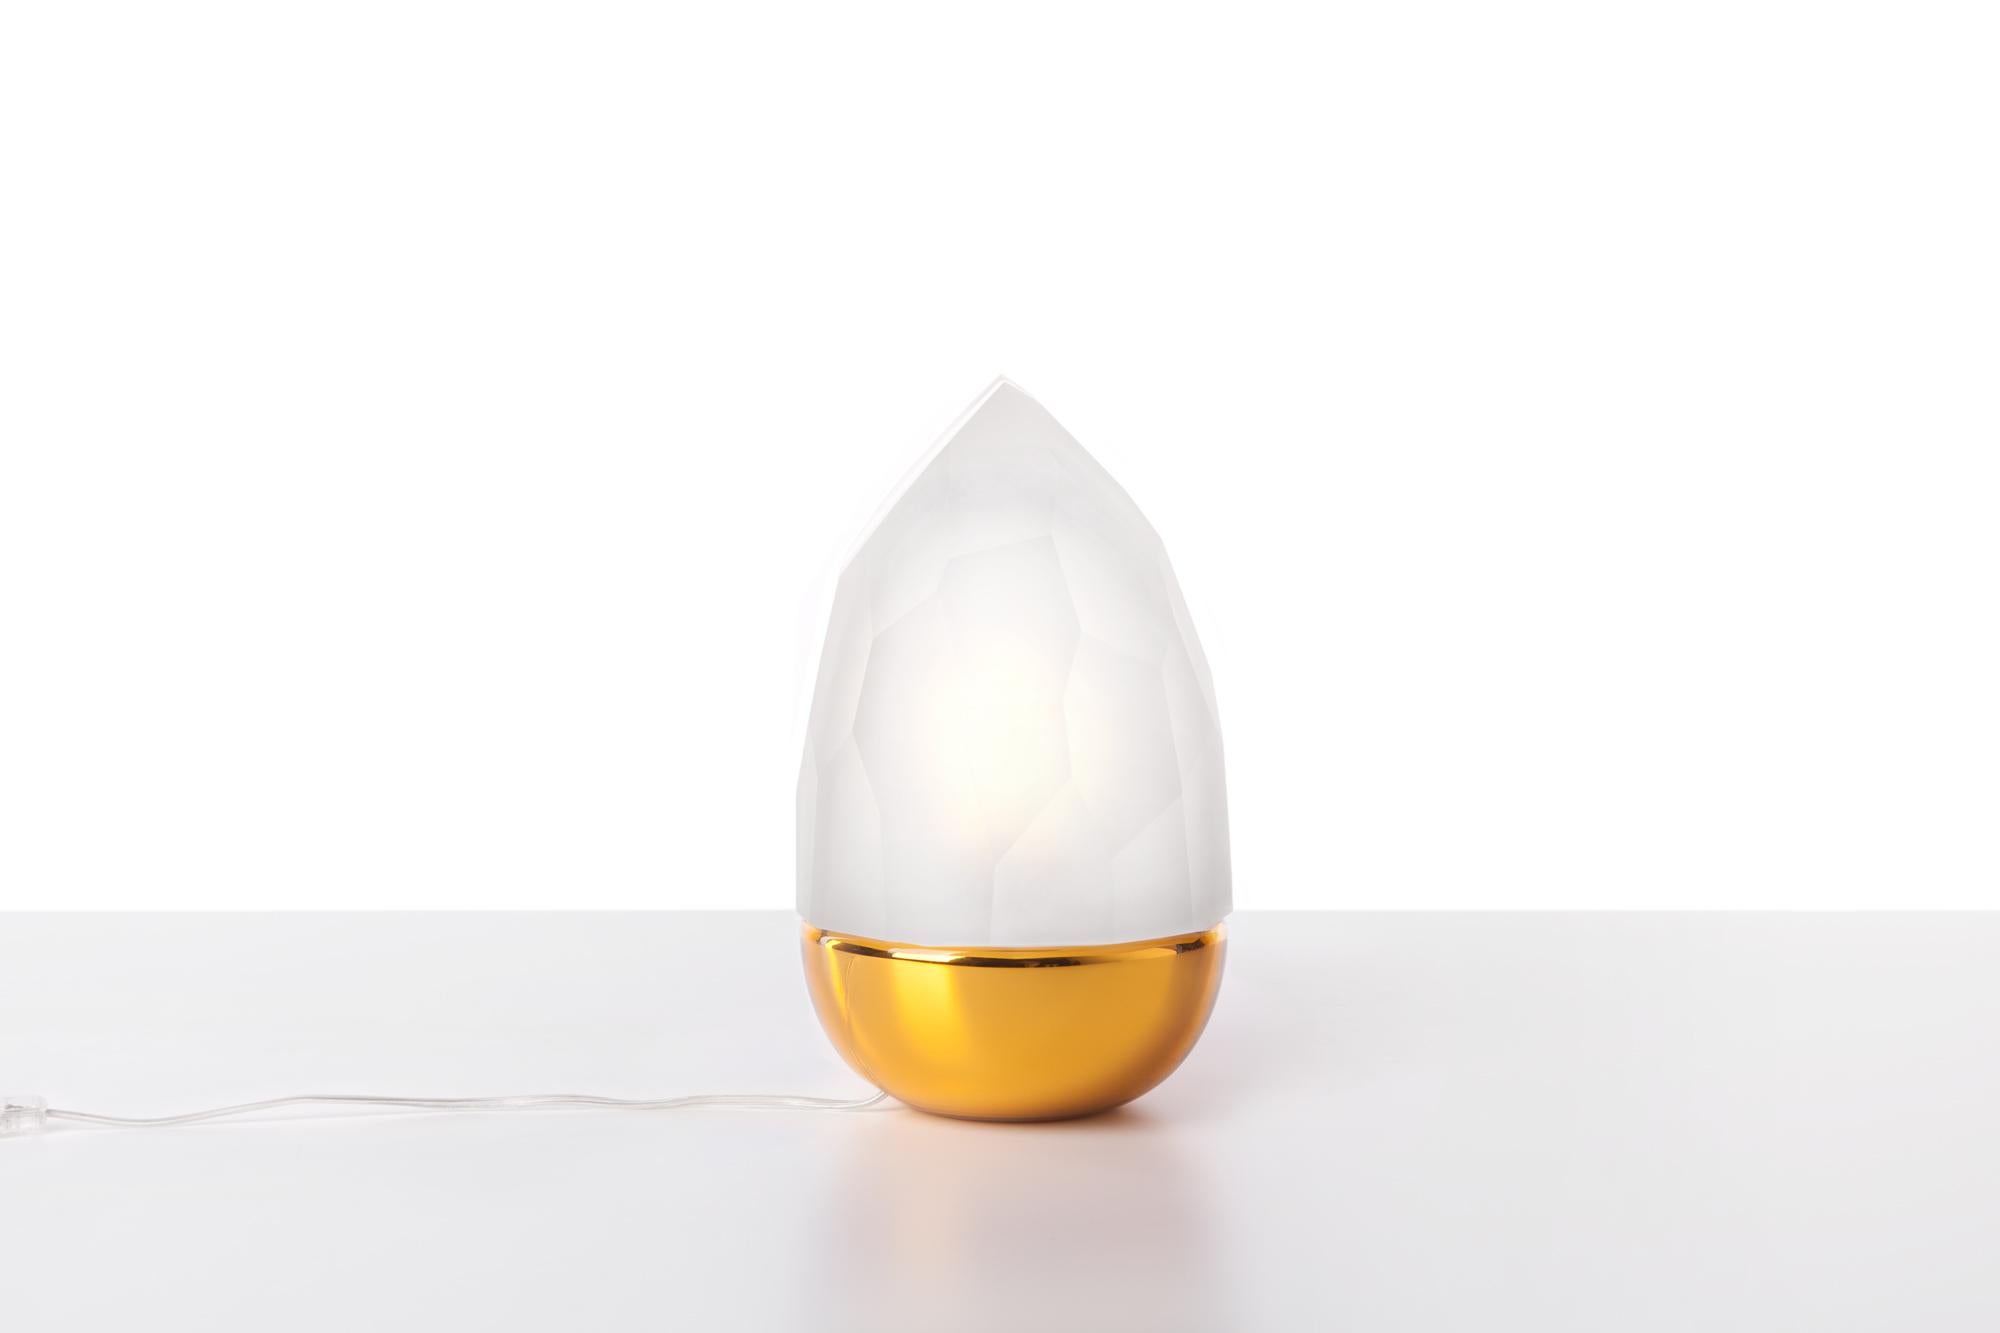 Clear and gold Mr. Flame table lamp by Dechem Studio.
Dimensions: D 18 x H 28 cm.
Materials: glass.
Also available: different colors available.

Two completely contrasting and differently manufactured glass shapes create Mr. Flame Table Lamp.